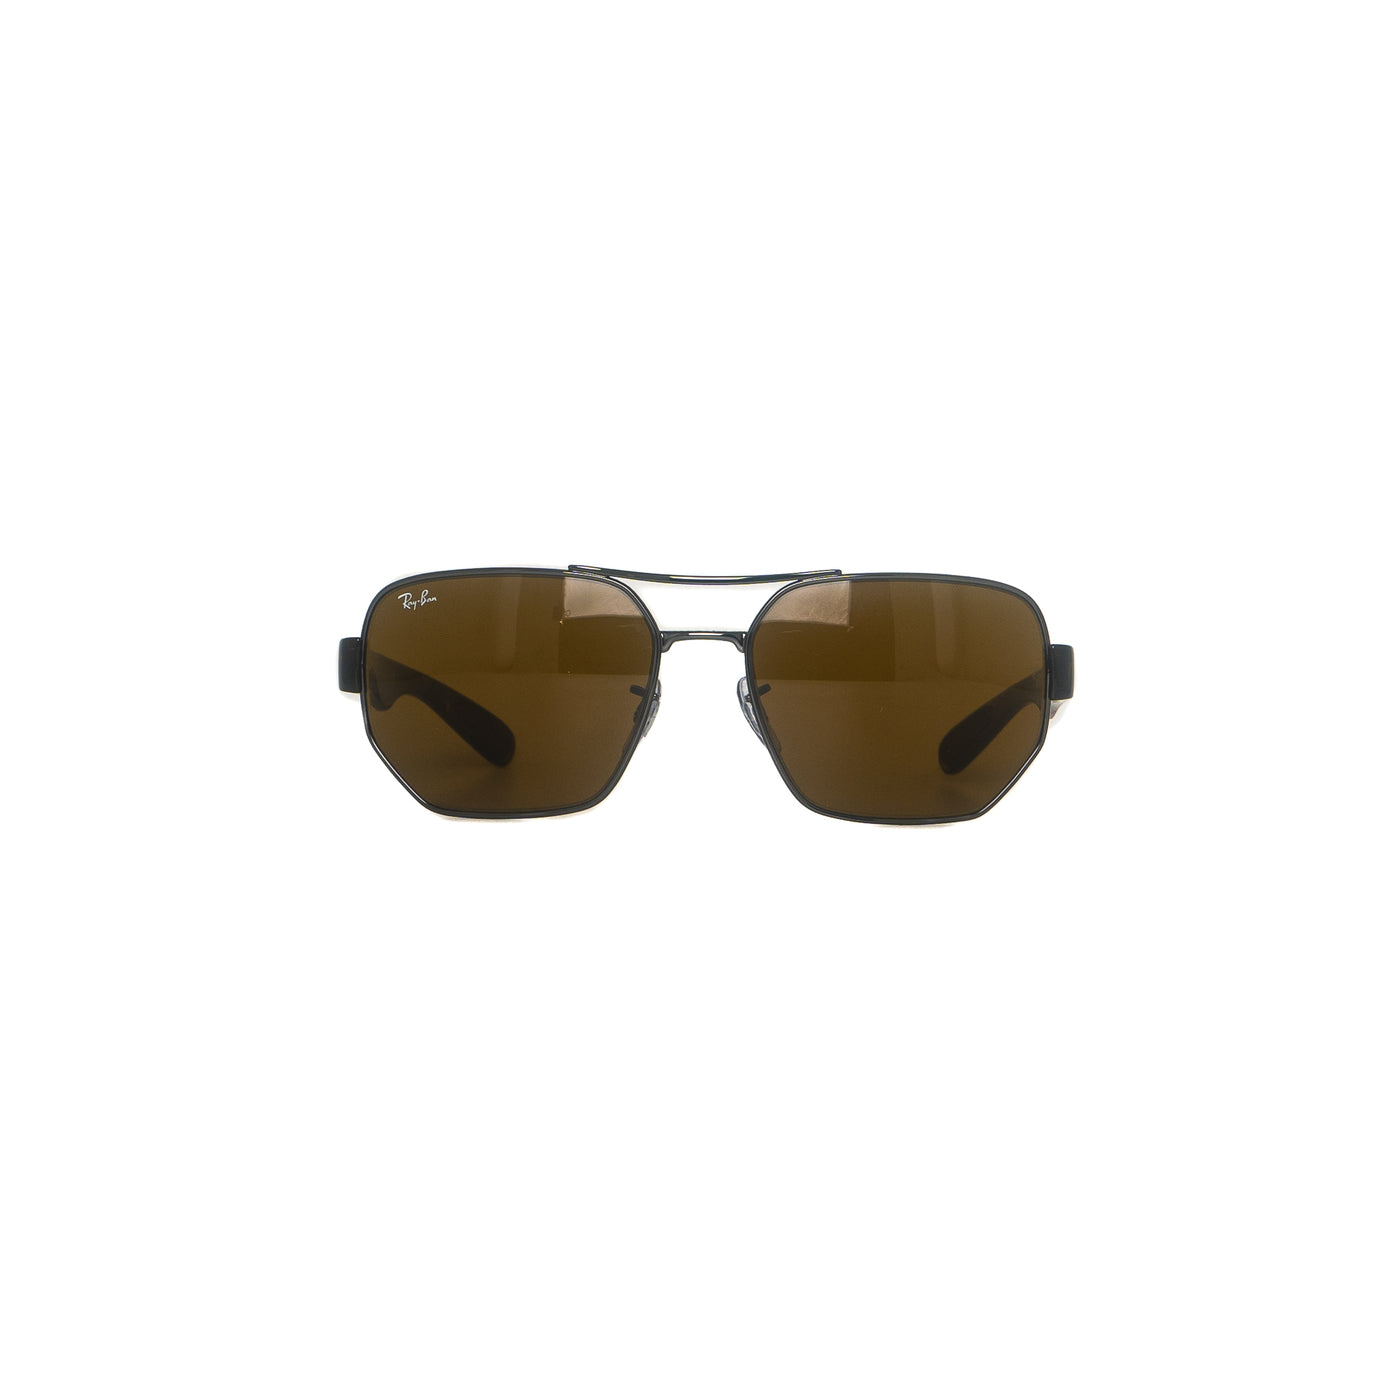 Ray-Ban Highstreet RB3672/004/73 | Sunglasses - Vision Express Optical Philippines